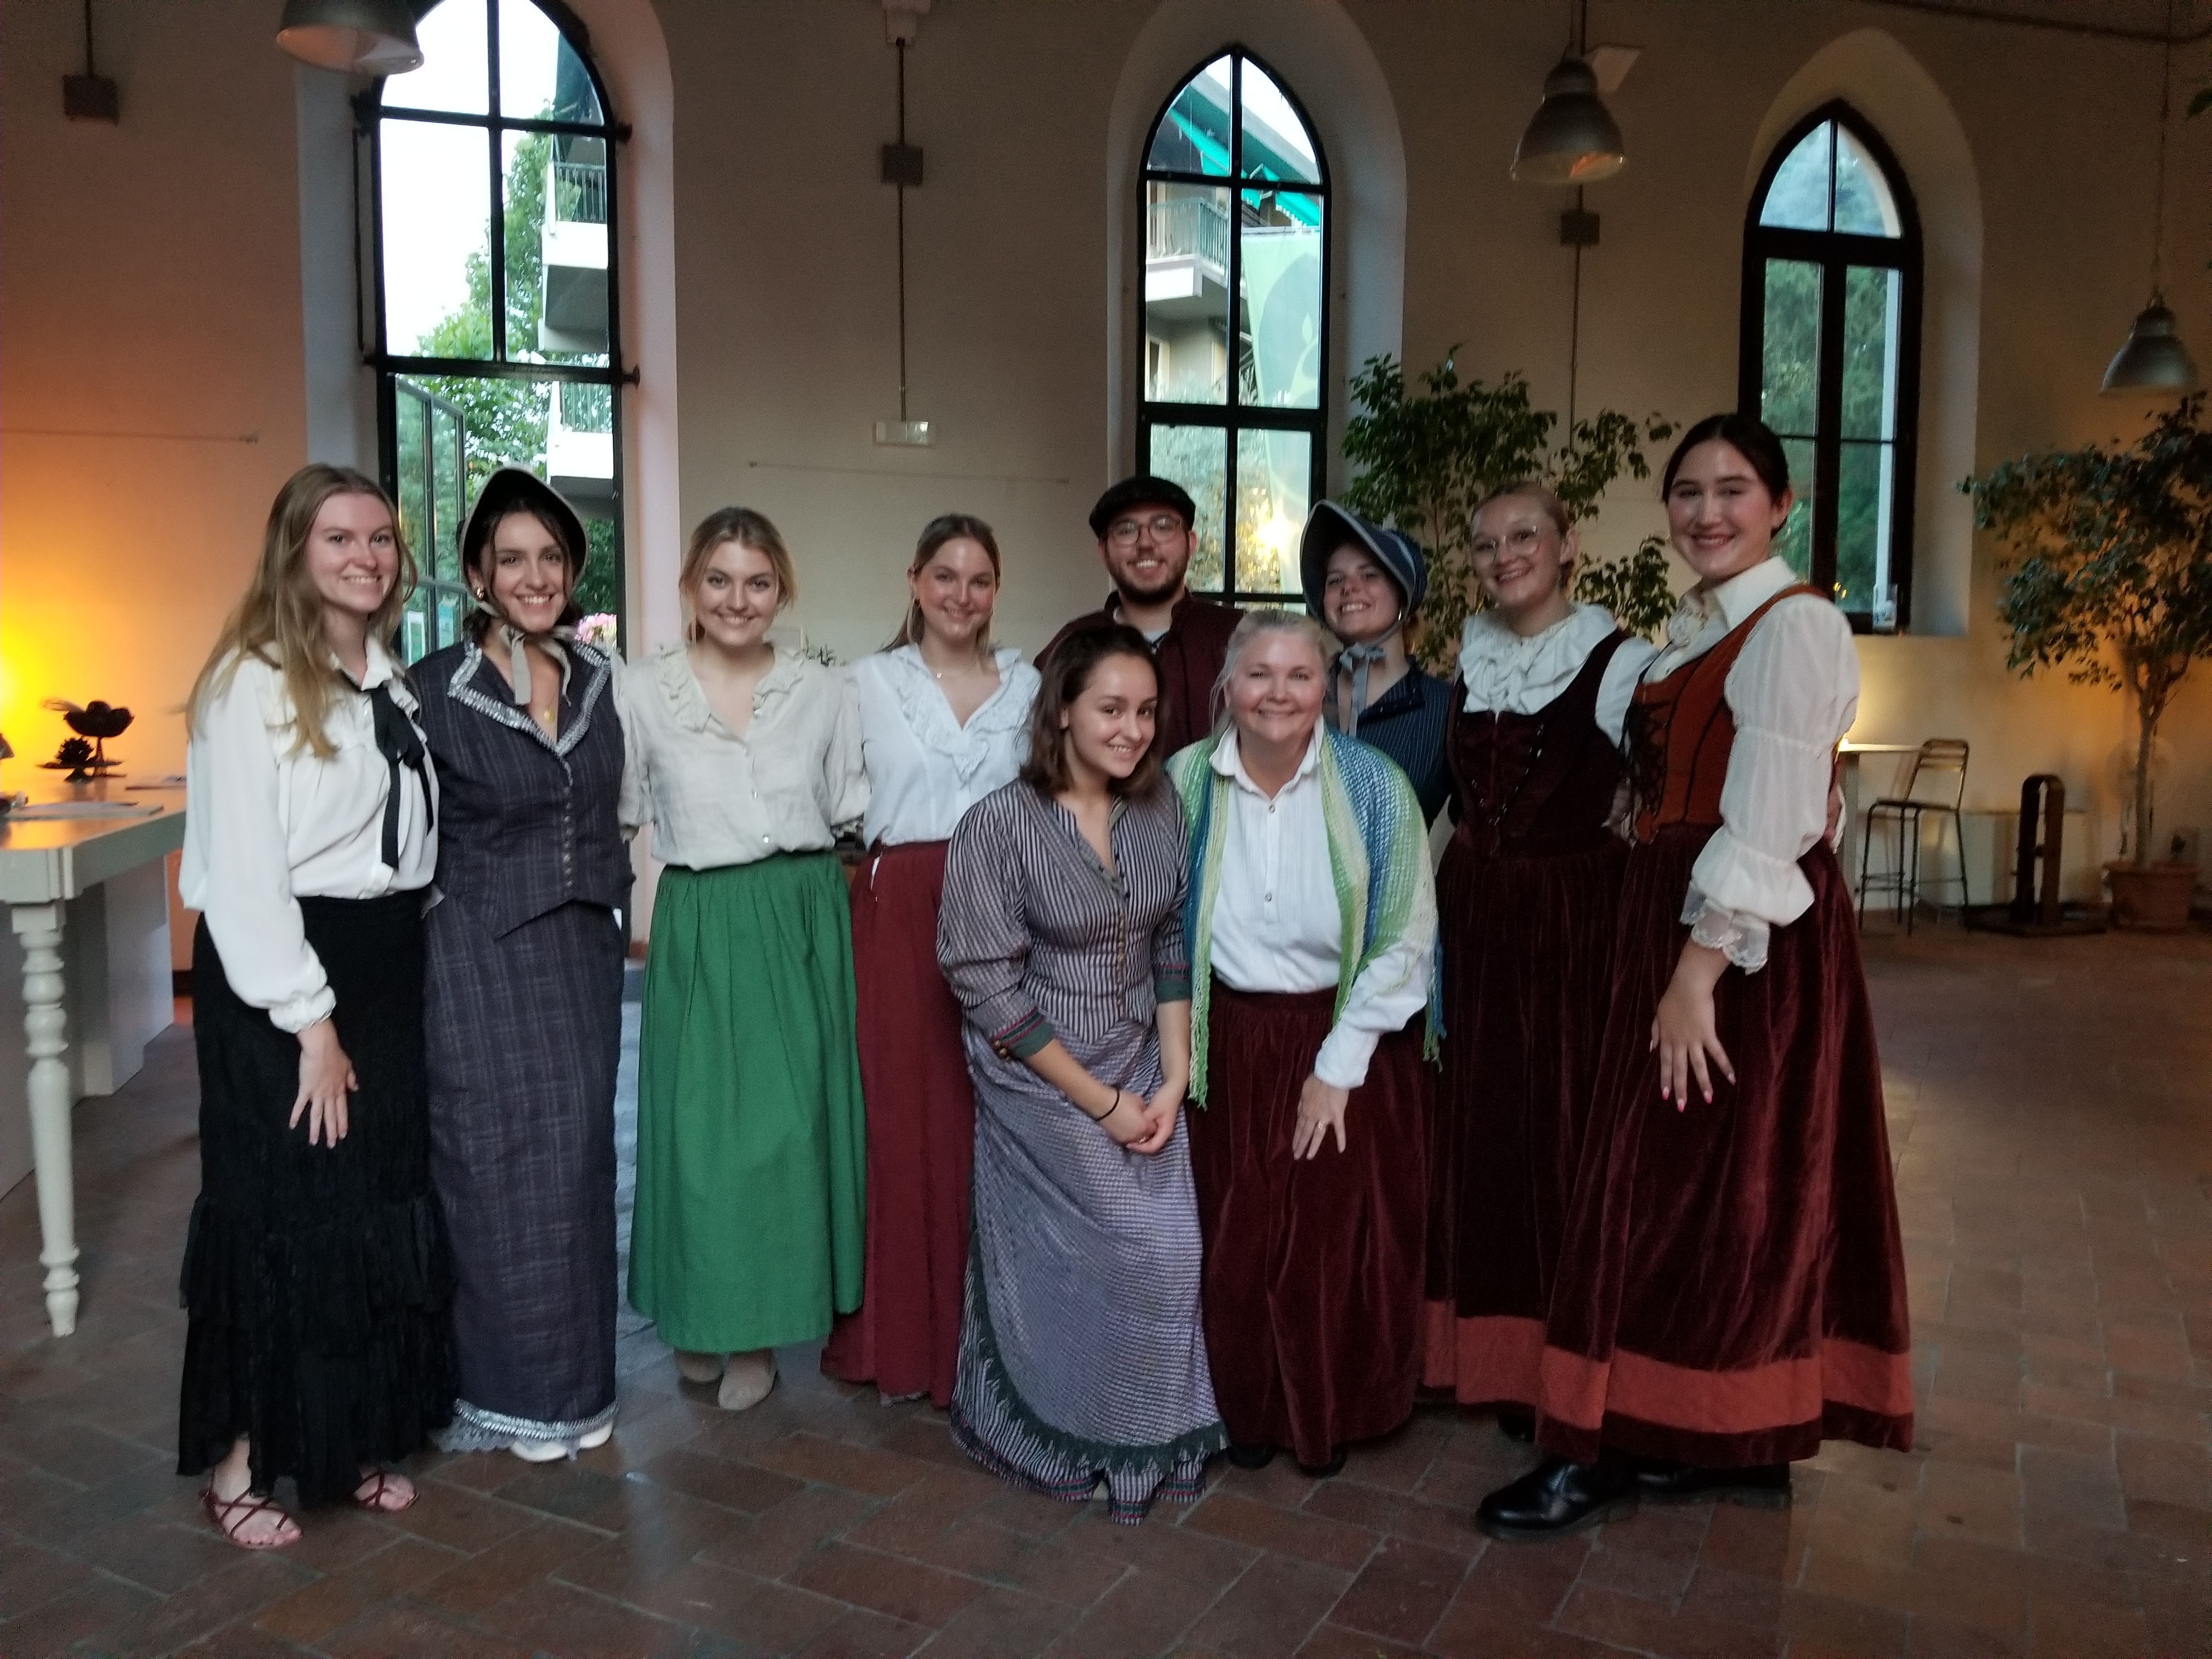 Students in the Summer Opera Workshop program before a performance with the Opera Company Florence. Senior Lecturer in Music Polly Cornelius, fourth from right, is leading the program.